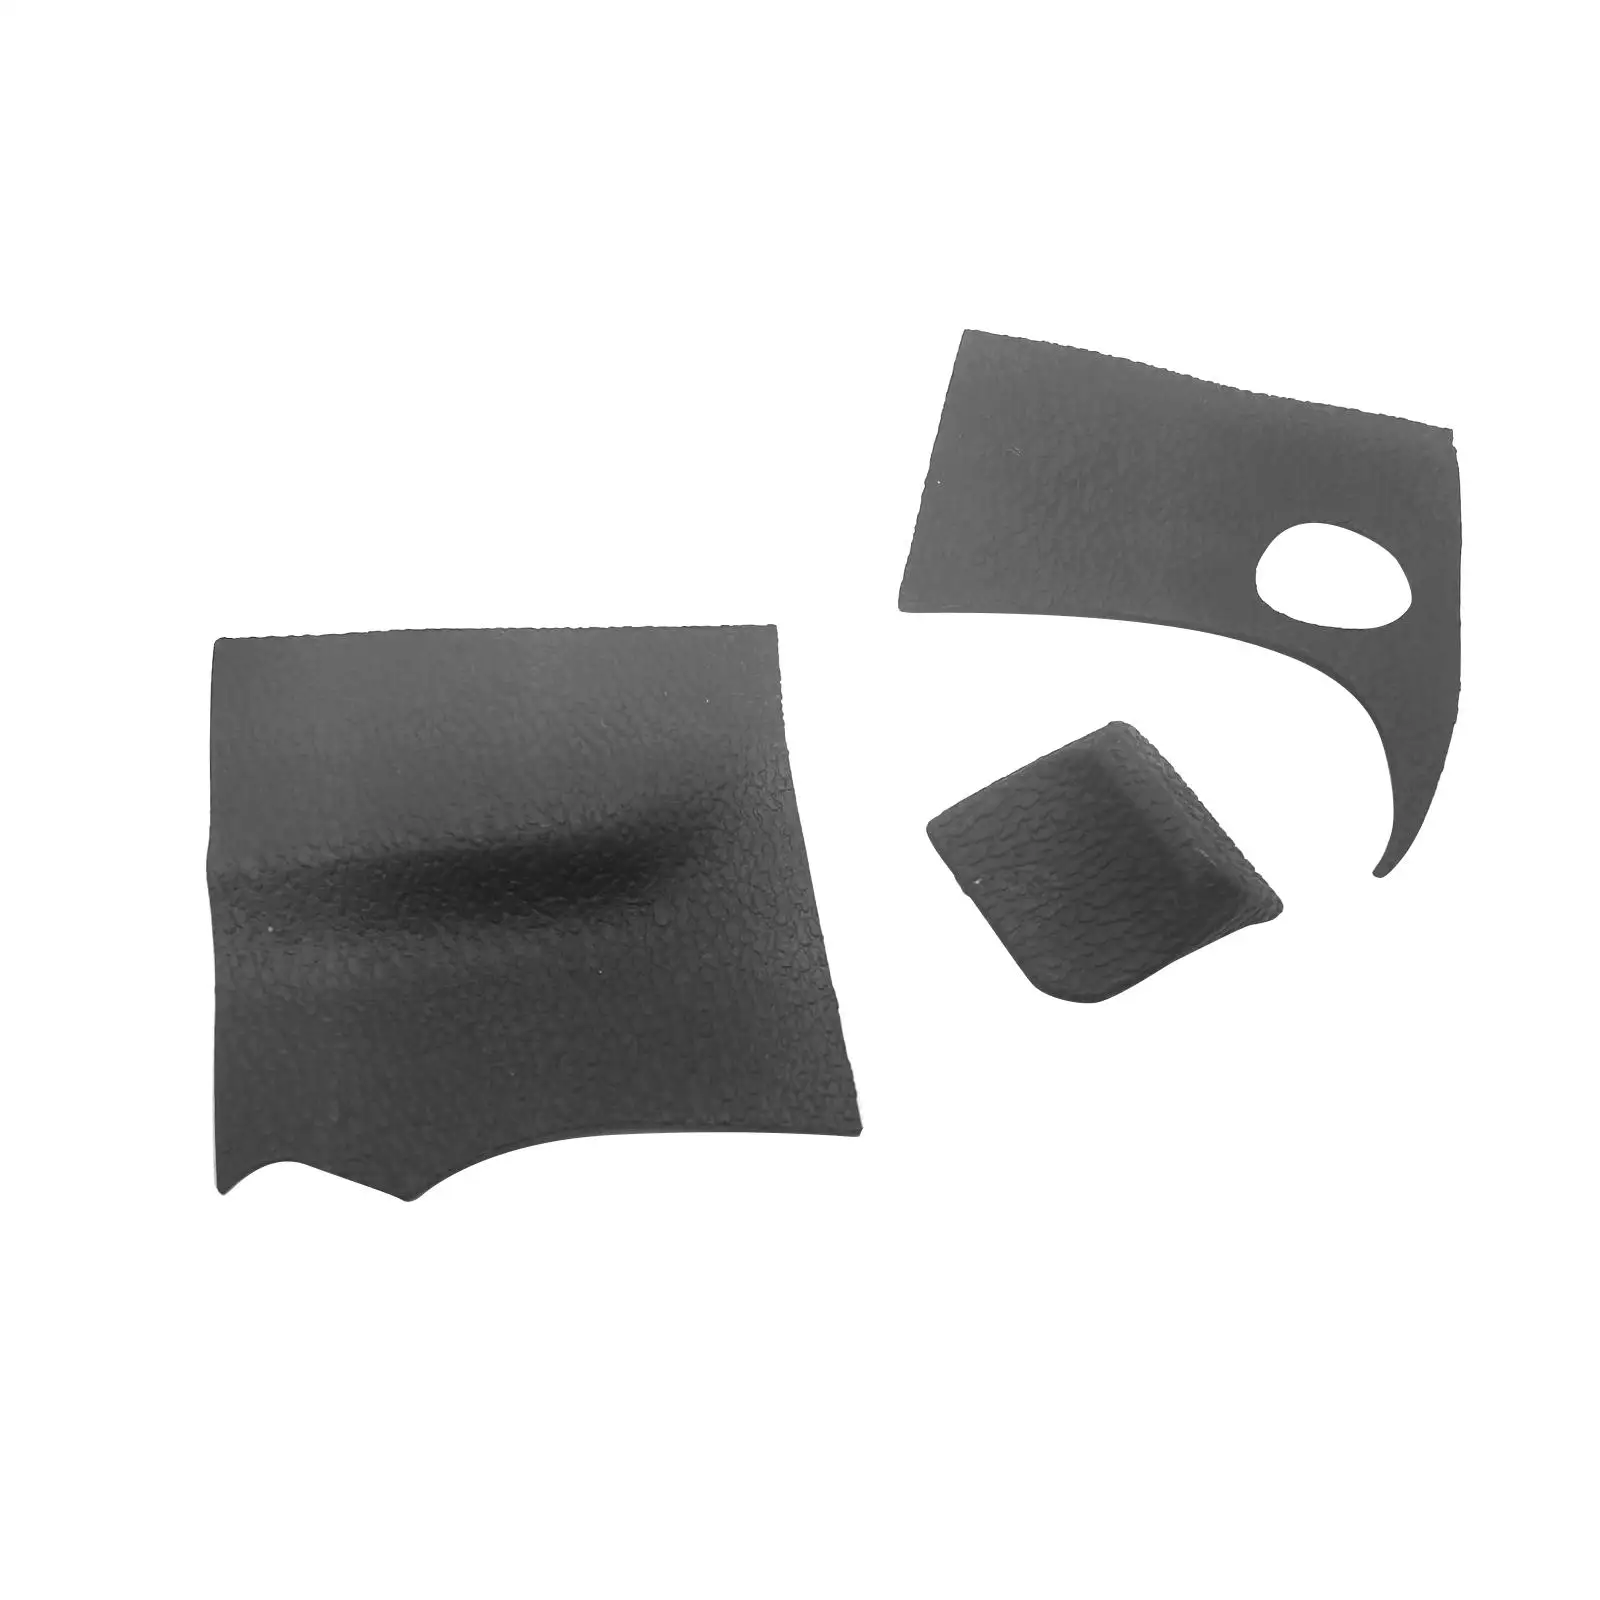 3Pcs Digital Camera Hand Grip Thumb Grip Spare Parts Repair Nonslip with Adhesion Tape Rubber Cover Protection for XT10 XT20